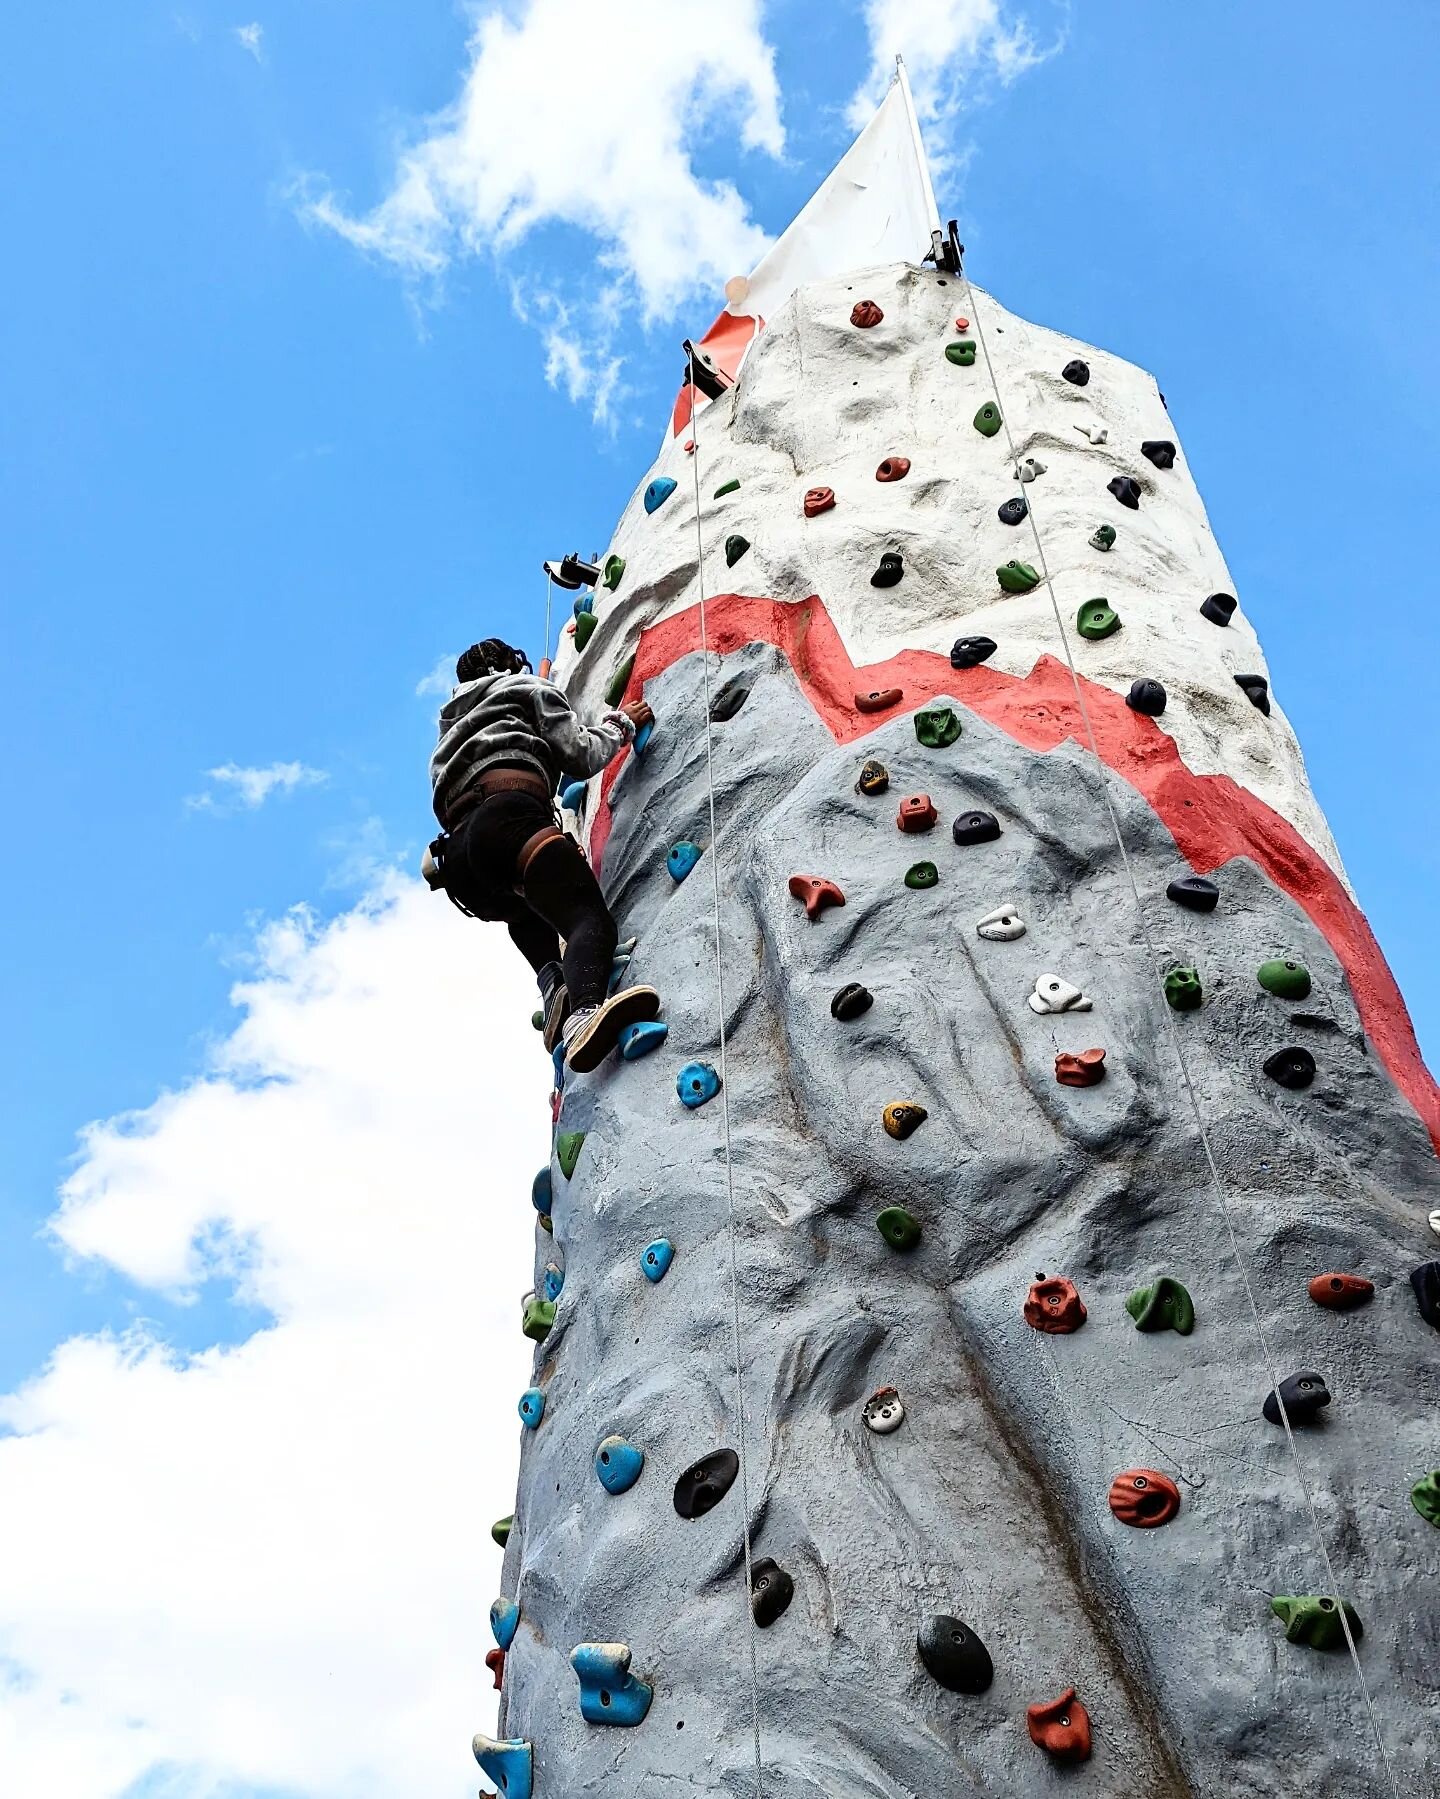 What are you doing this weekend? Just chilling or searching for adventure? We're gearing up for our fall season, and we'll try to sneak in a little bit of climbing if we can. Those temps are going to drop soon and then it will be time to go climb! Ha